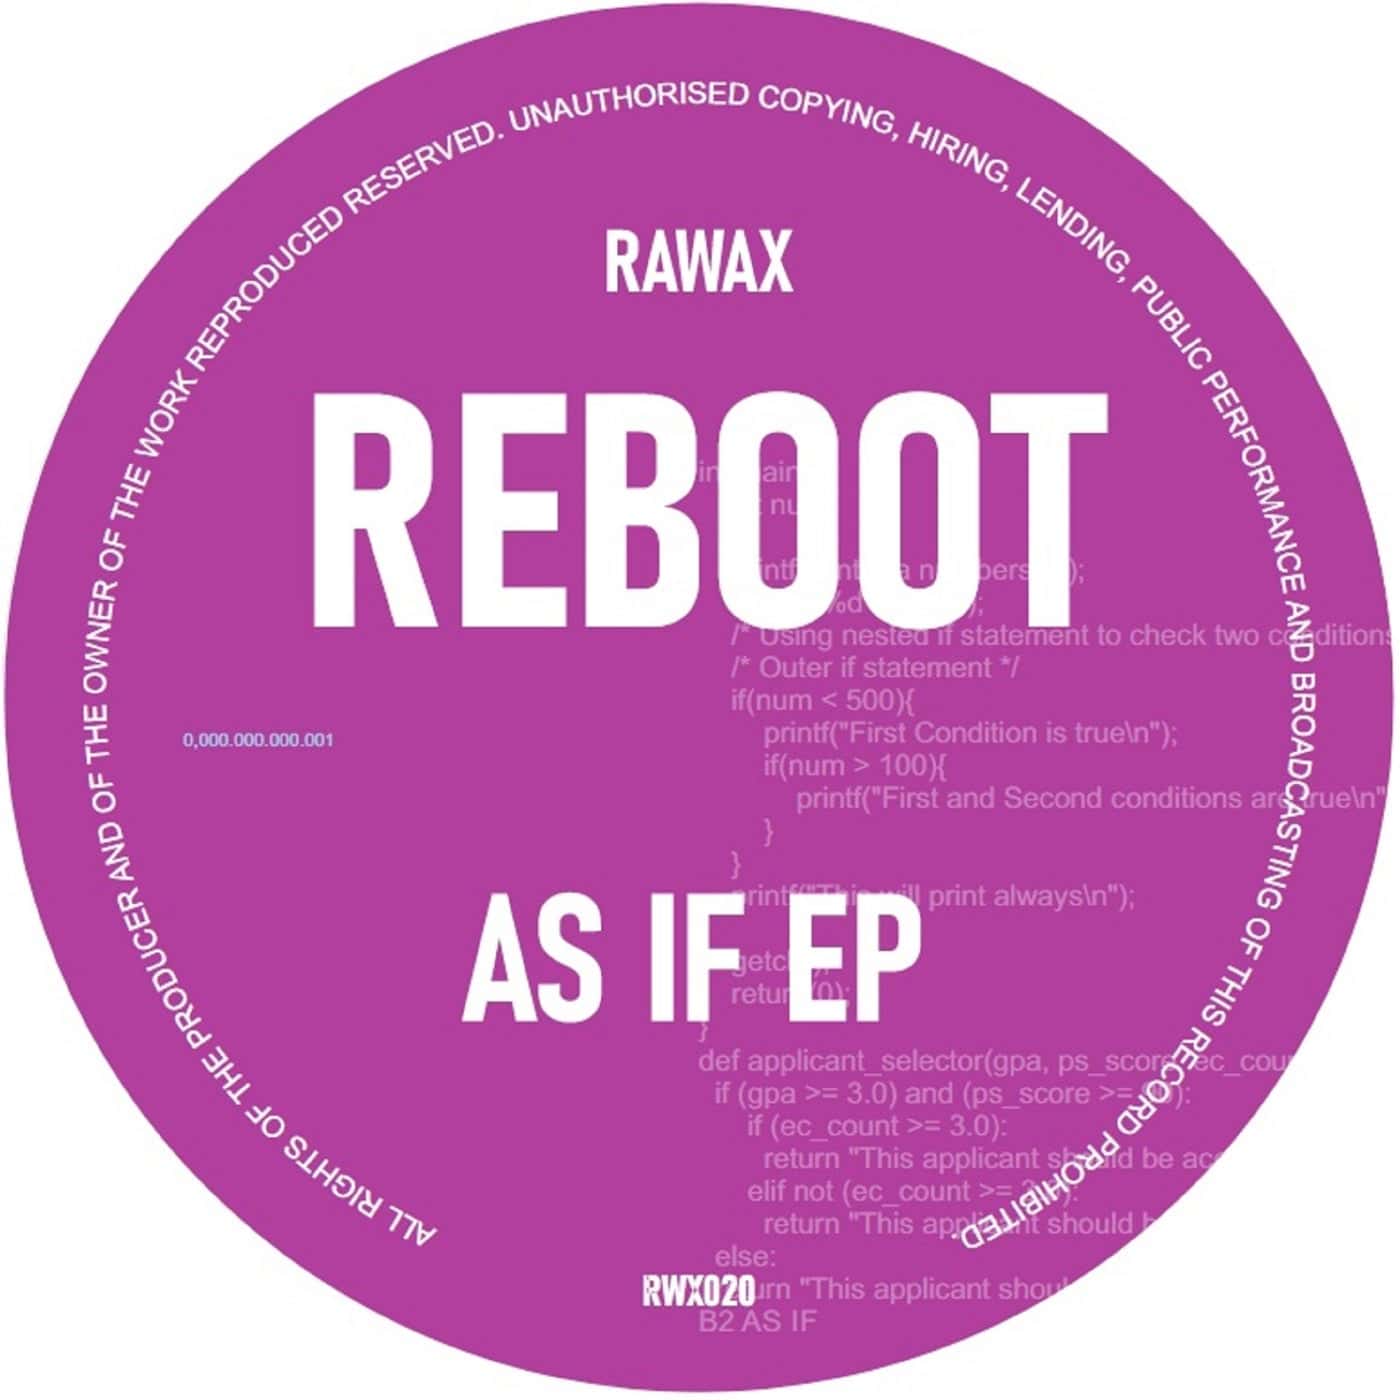 image cover: As If EP by Reboot on Rawax